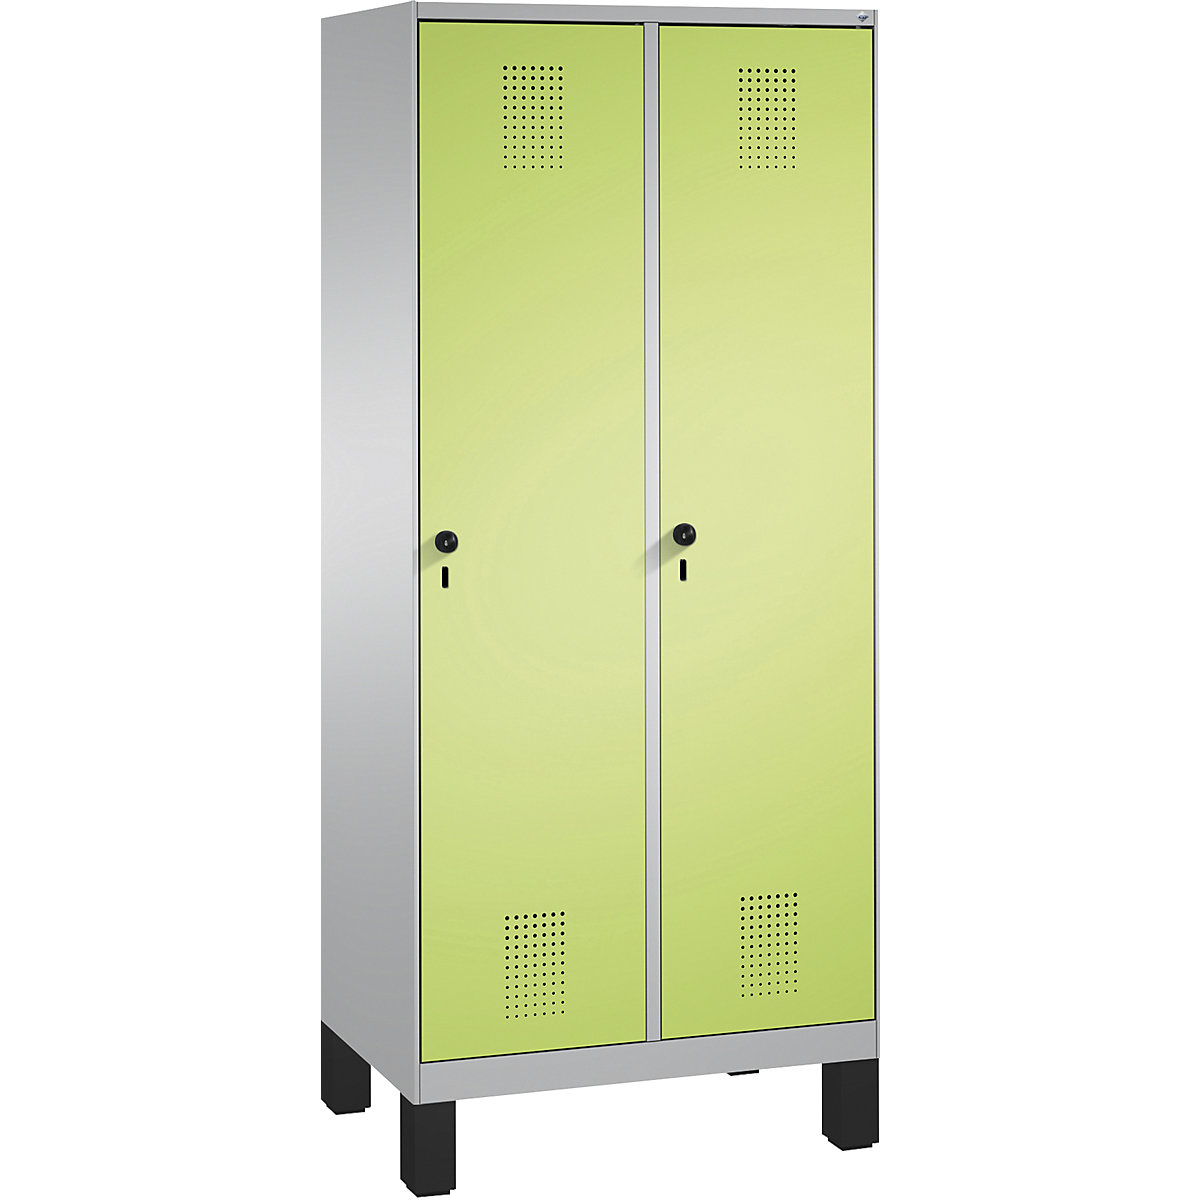 EVOLO cloakroom locker, with feet – C+P, 2 compartments, compartment width 400 mm, white aluminium / viridian green-5